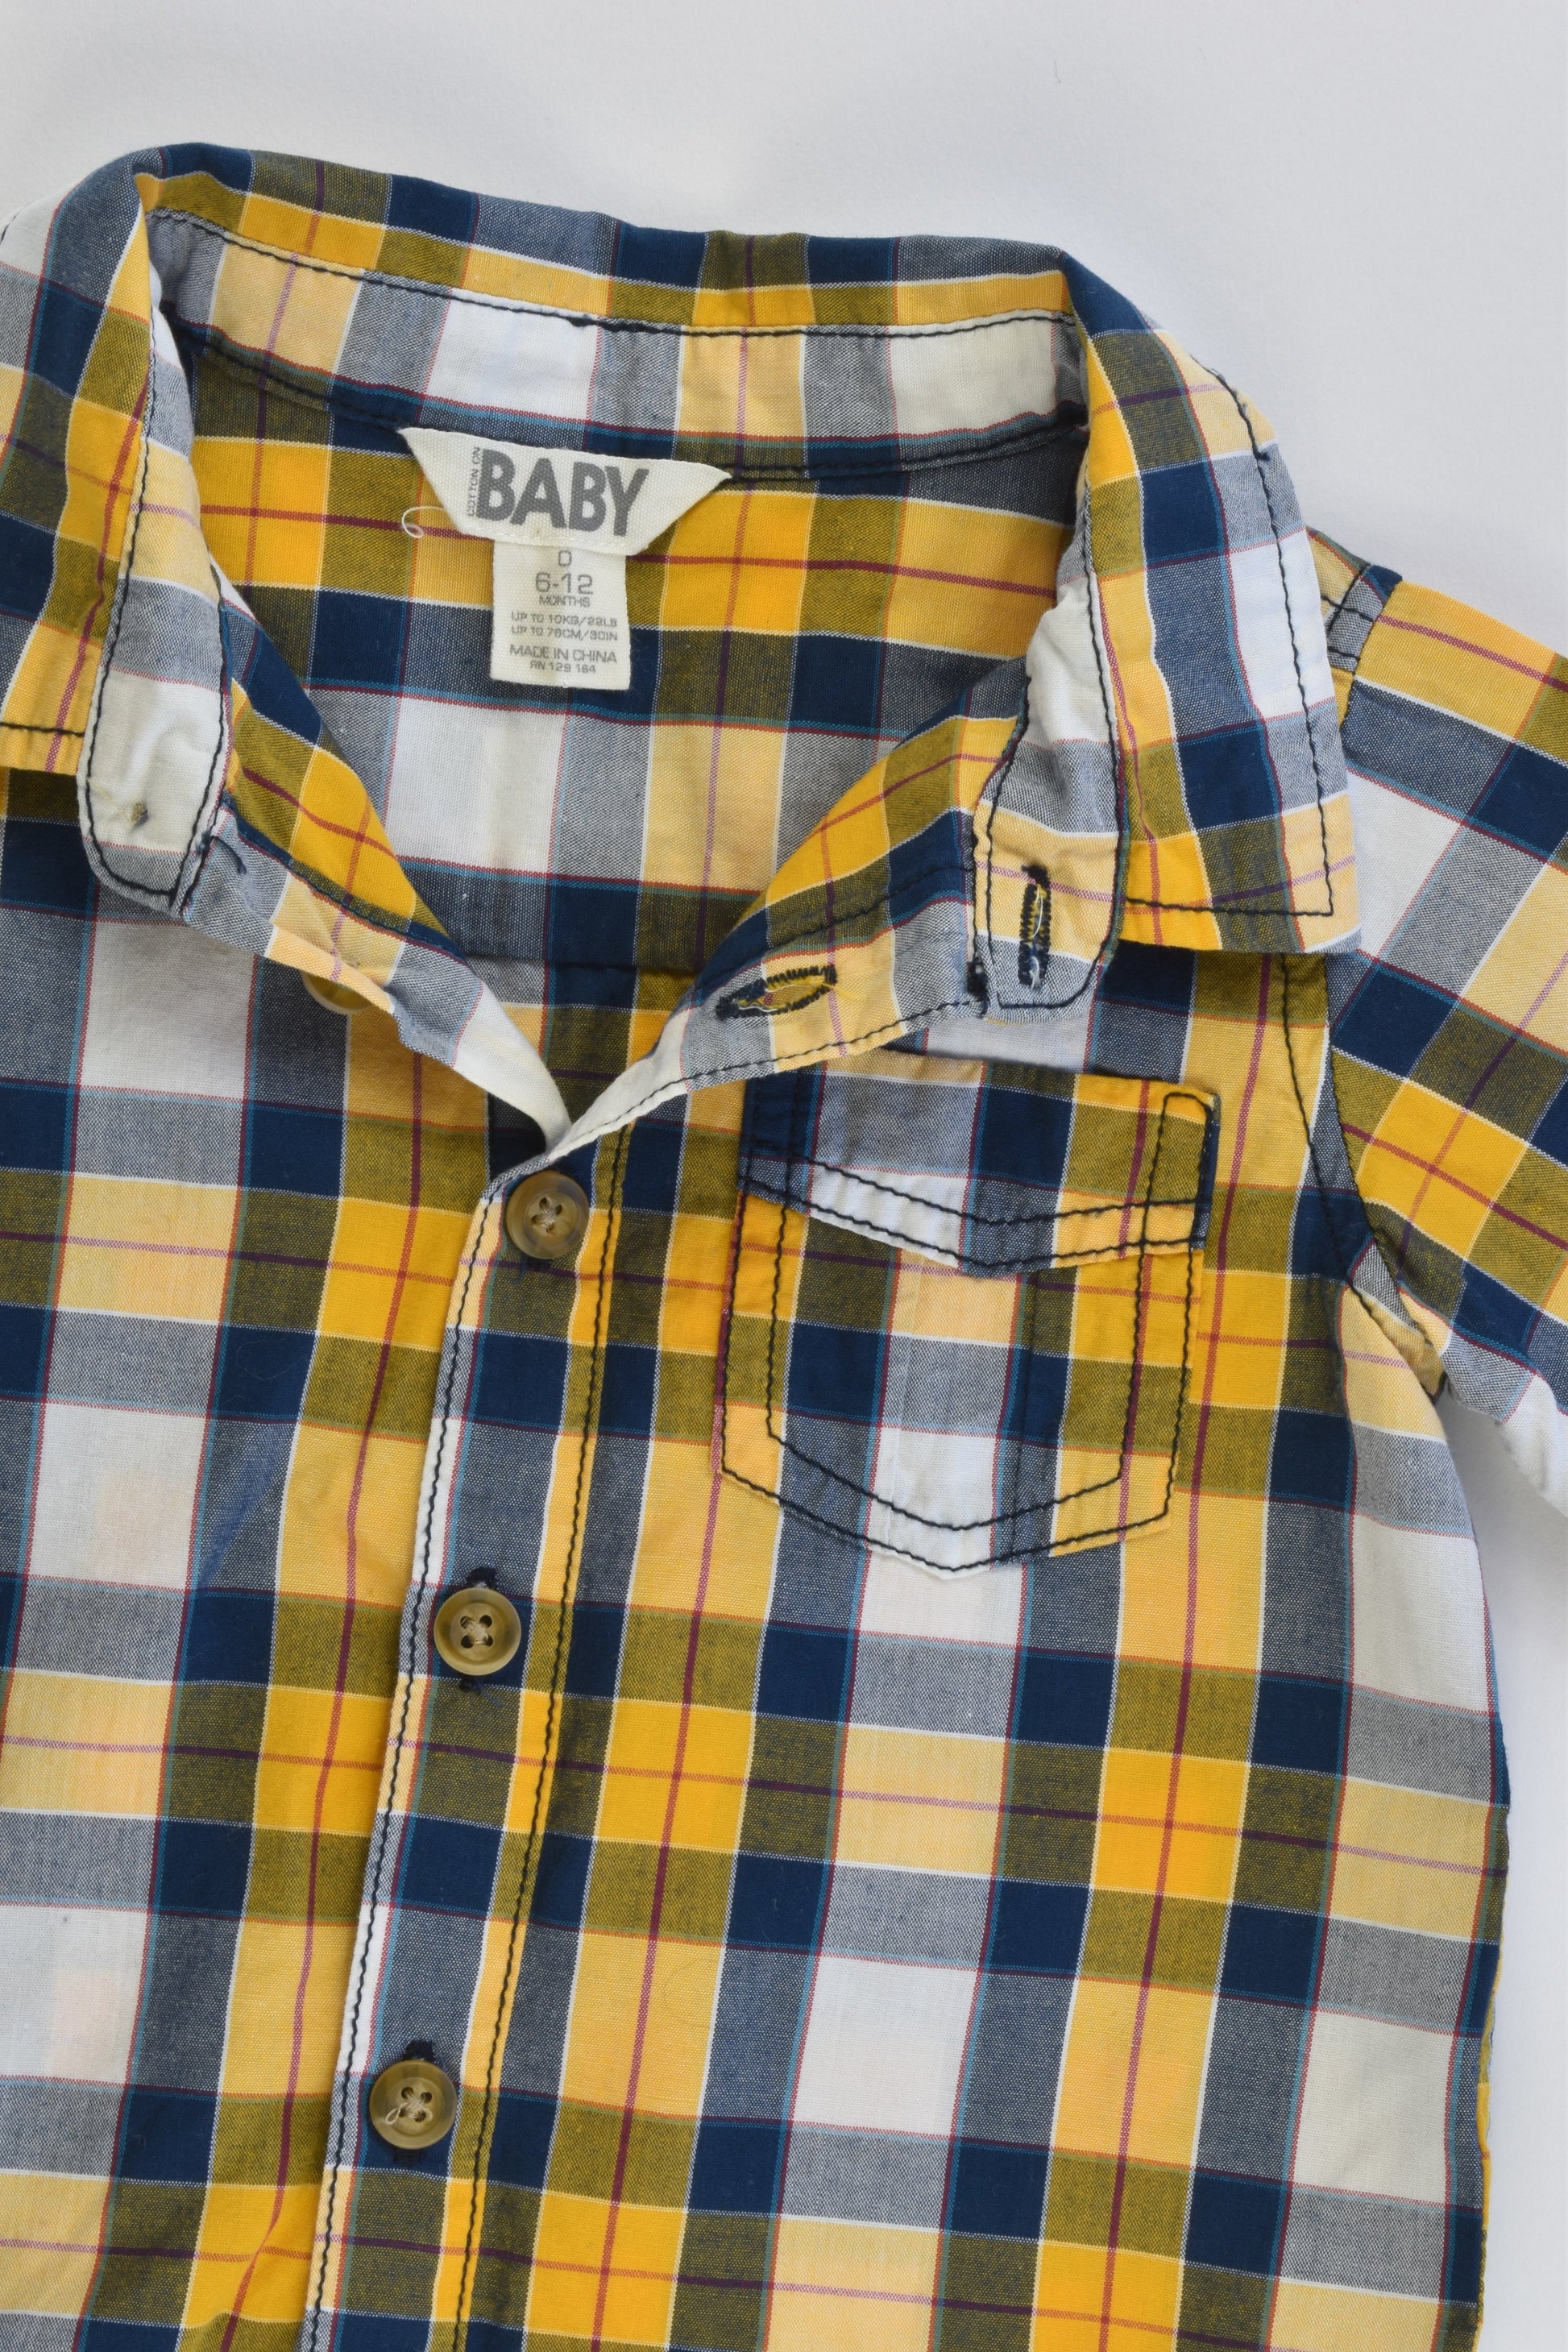 Cotton On Kids Size 0 (6-12 months) Checked Collared Shirt